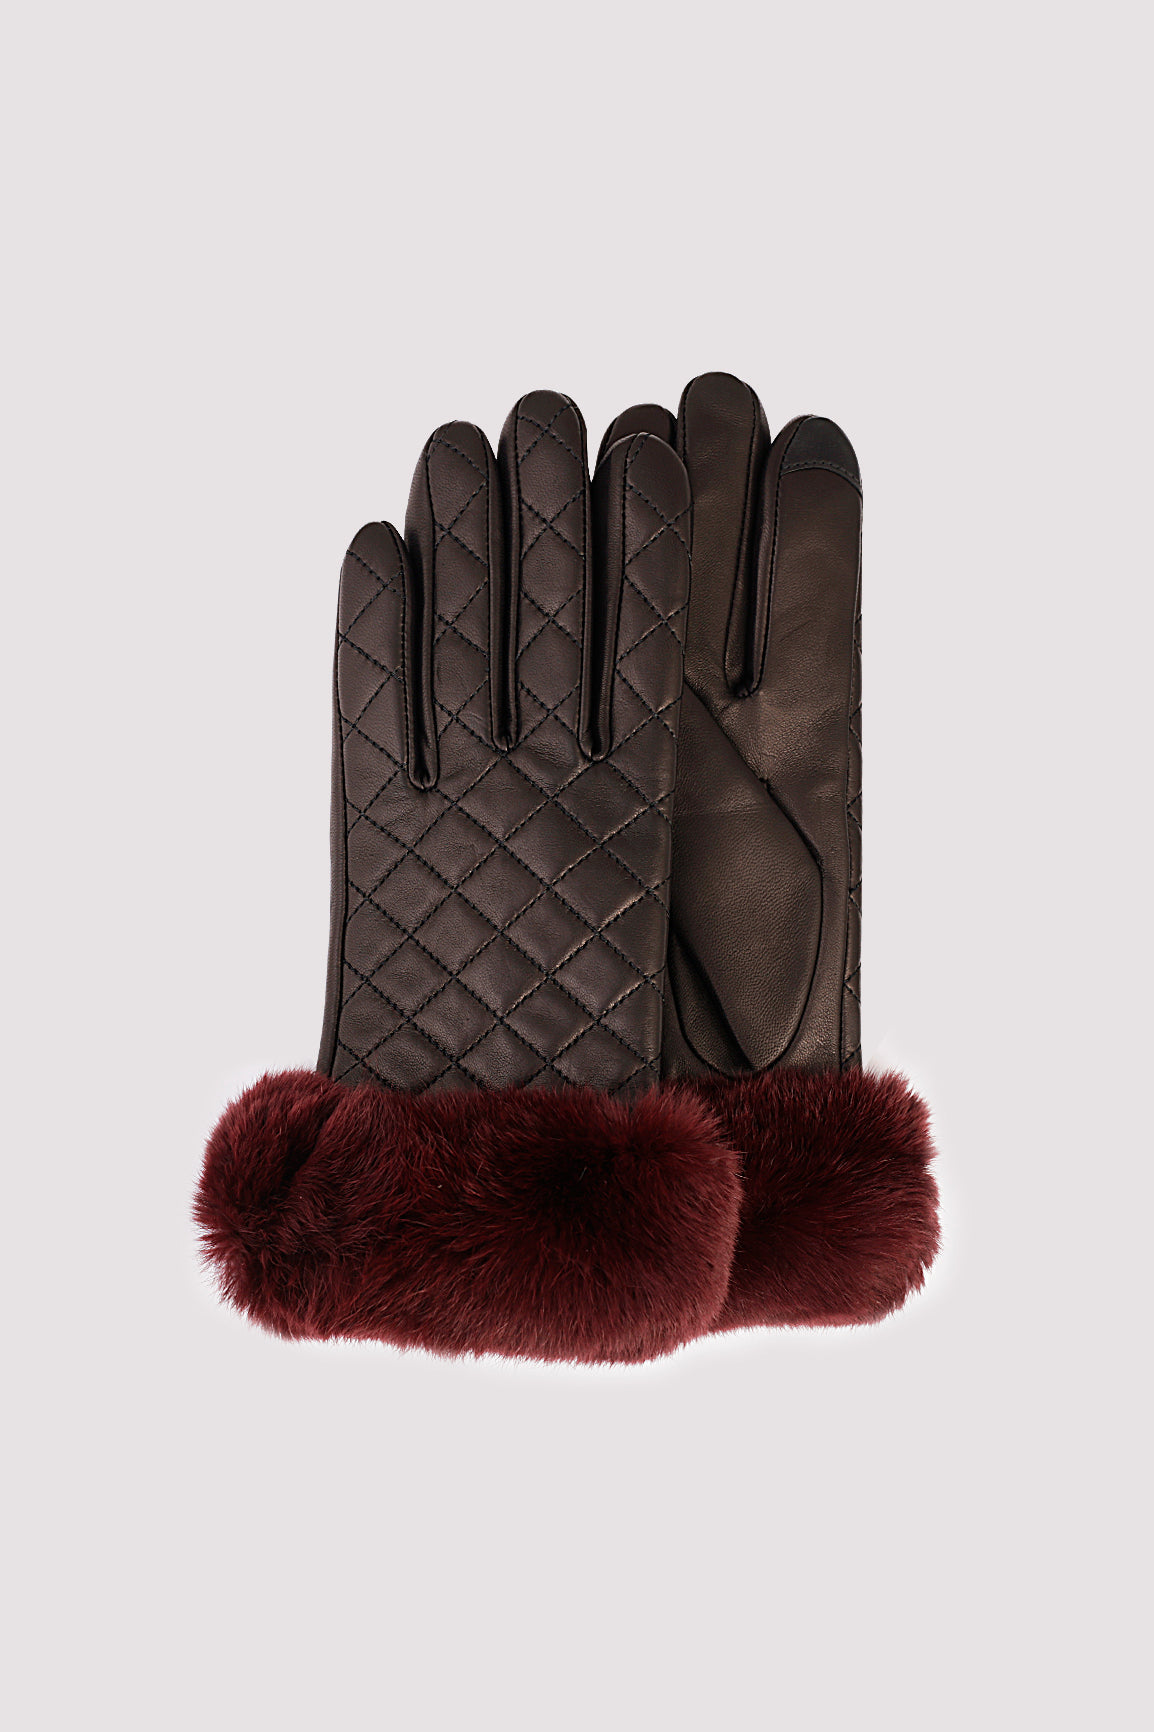 BRITTANY - Genuine Butter Soft Lambskin Leather Gloves With Fur Trim ...